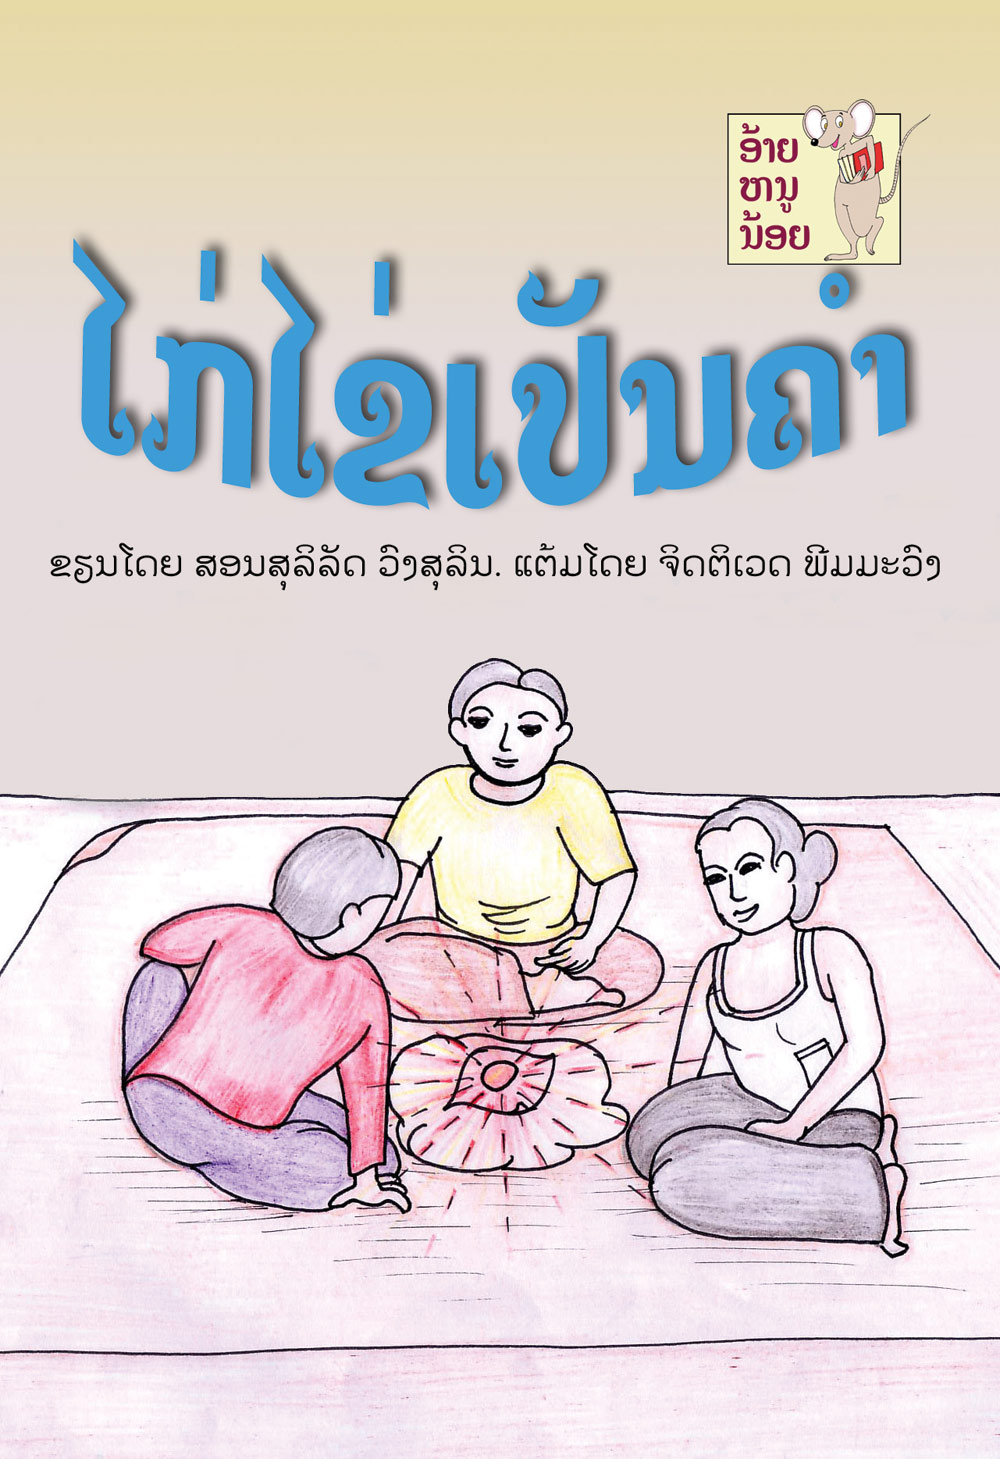 The Chicken that Laid the Golden Eggs large book cover, published in Lao language